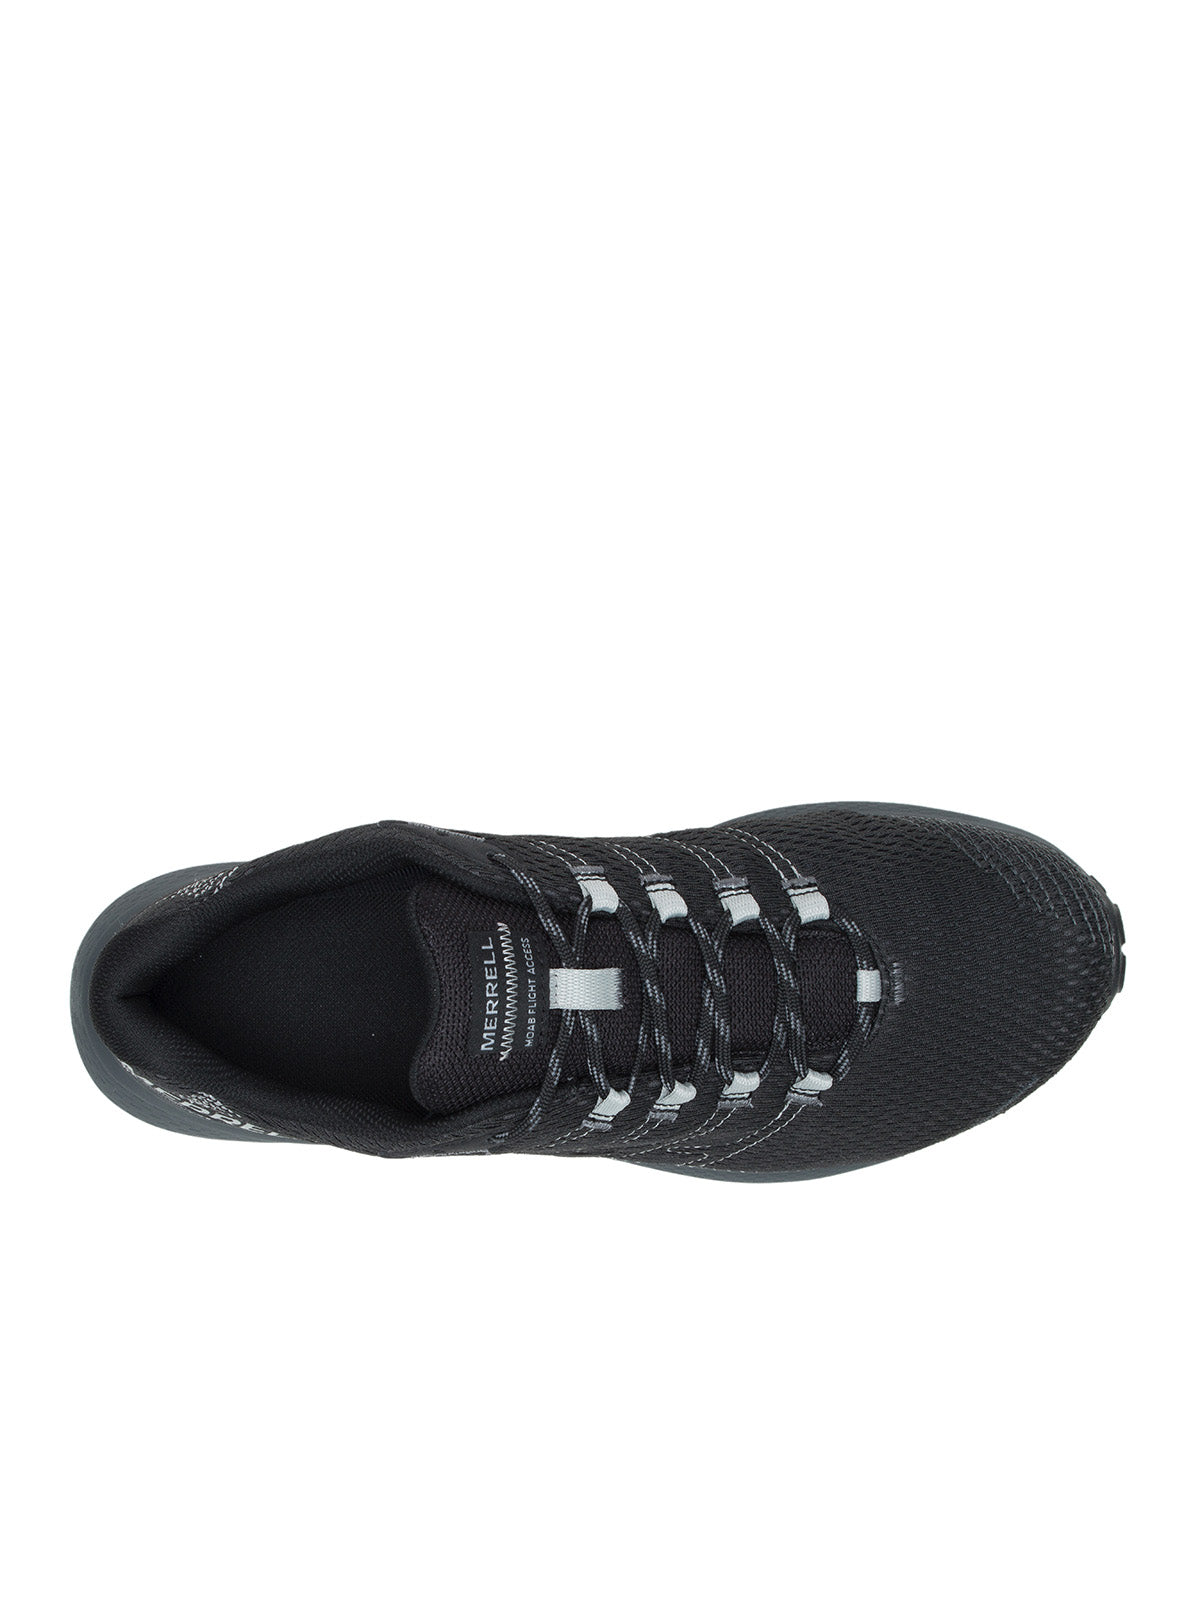 Chaussures pour homme Fly Strike GORETEX